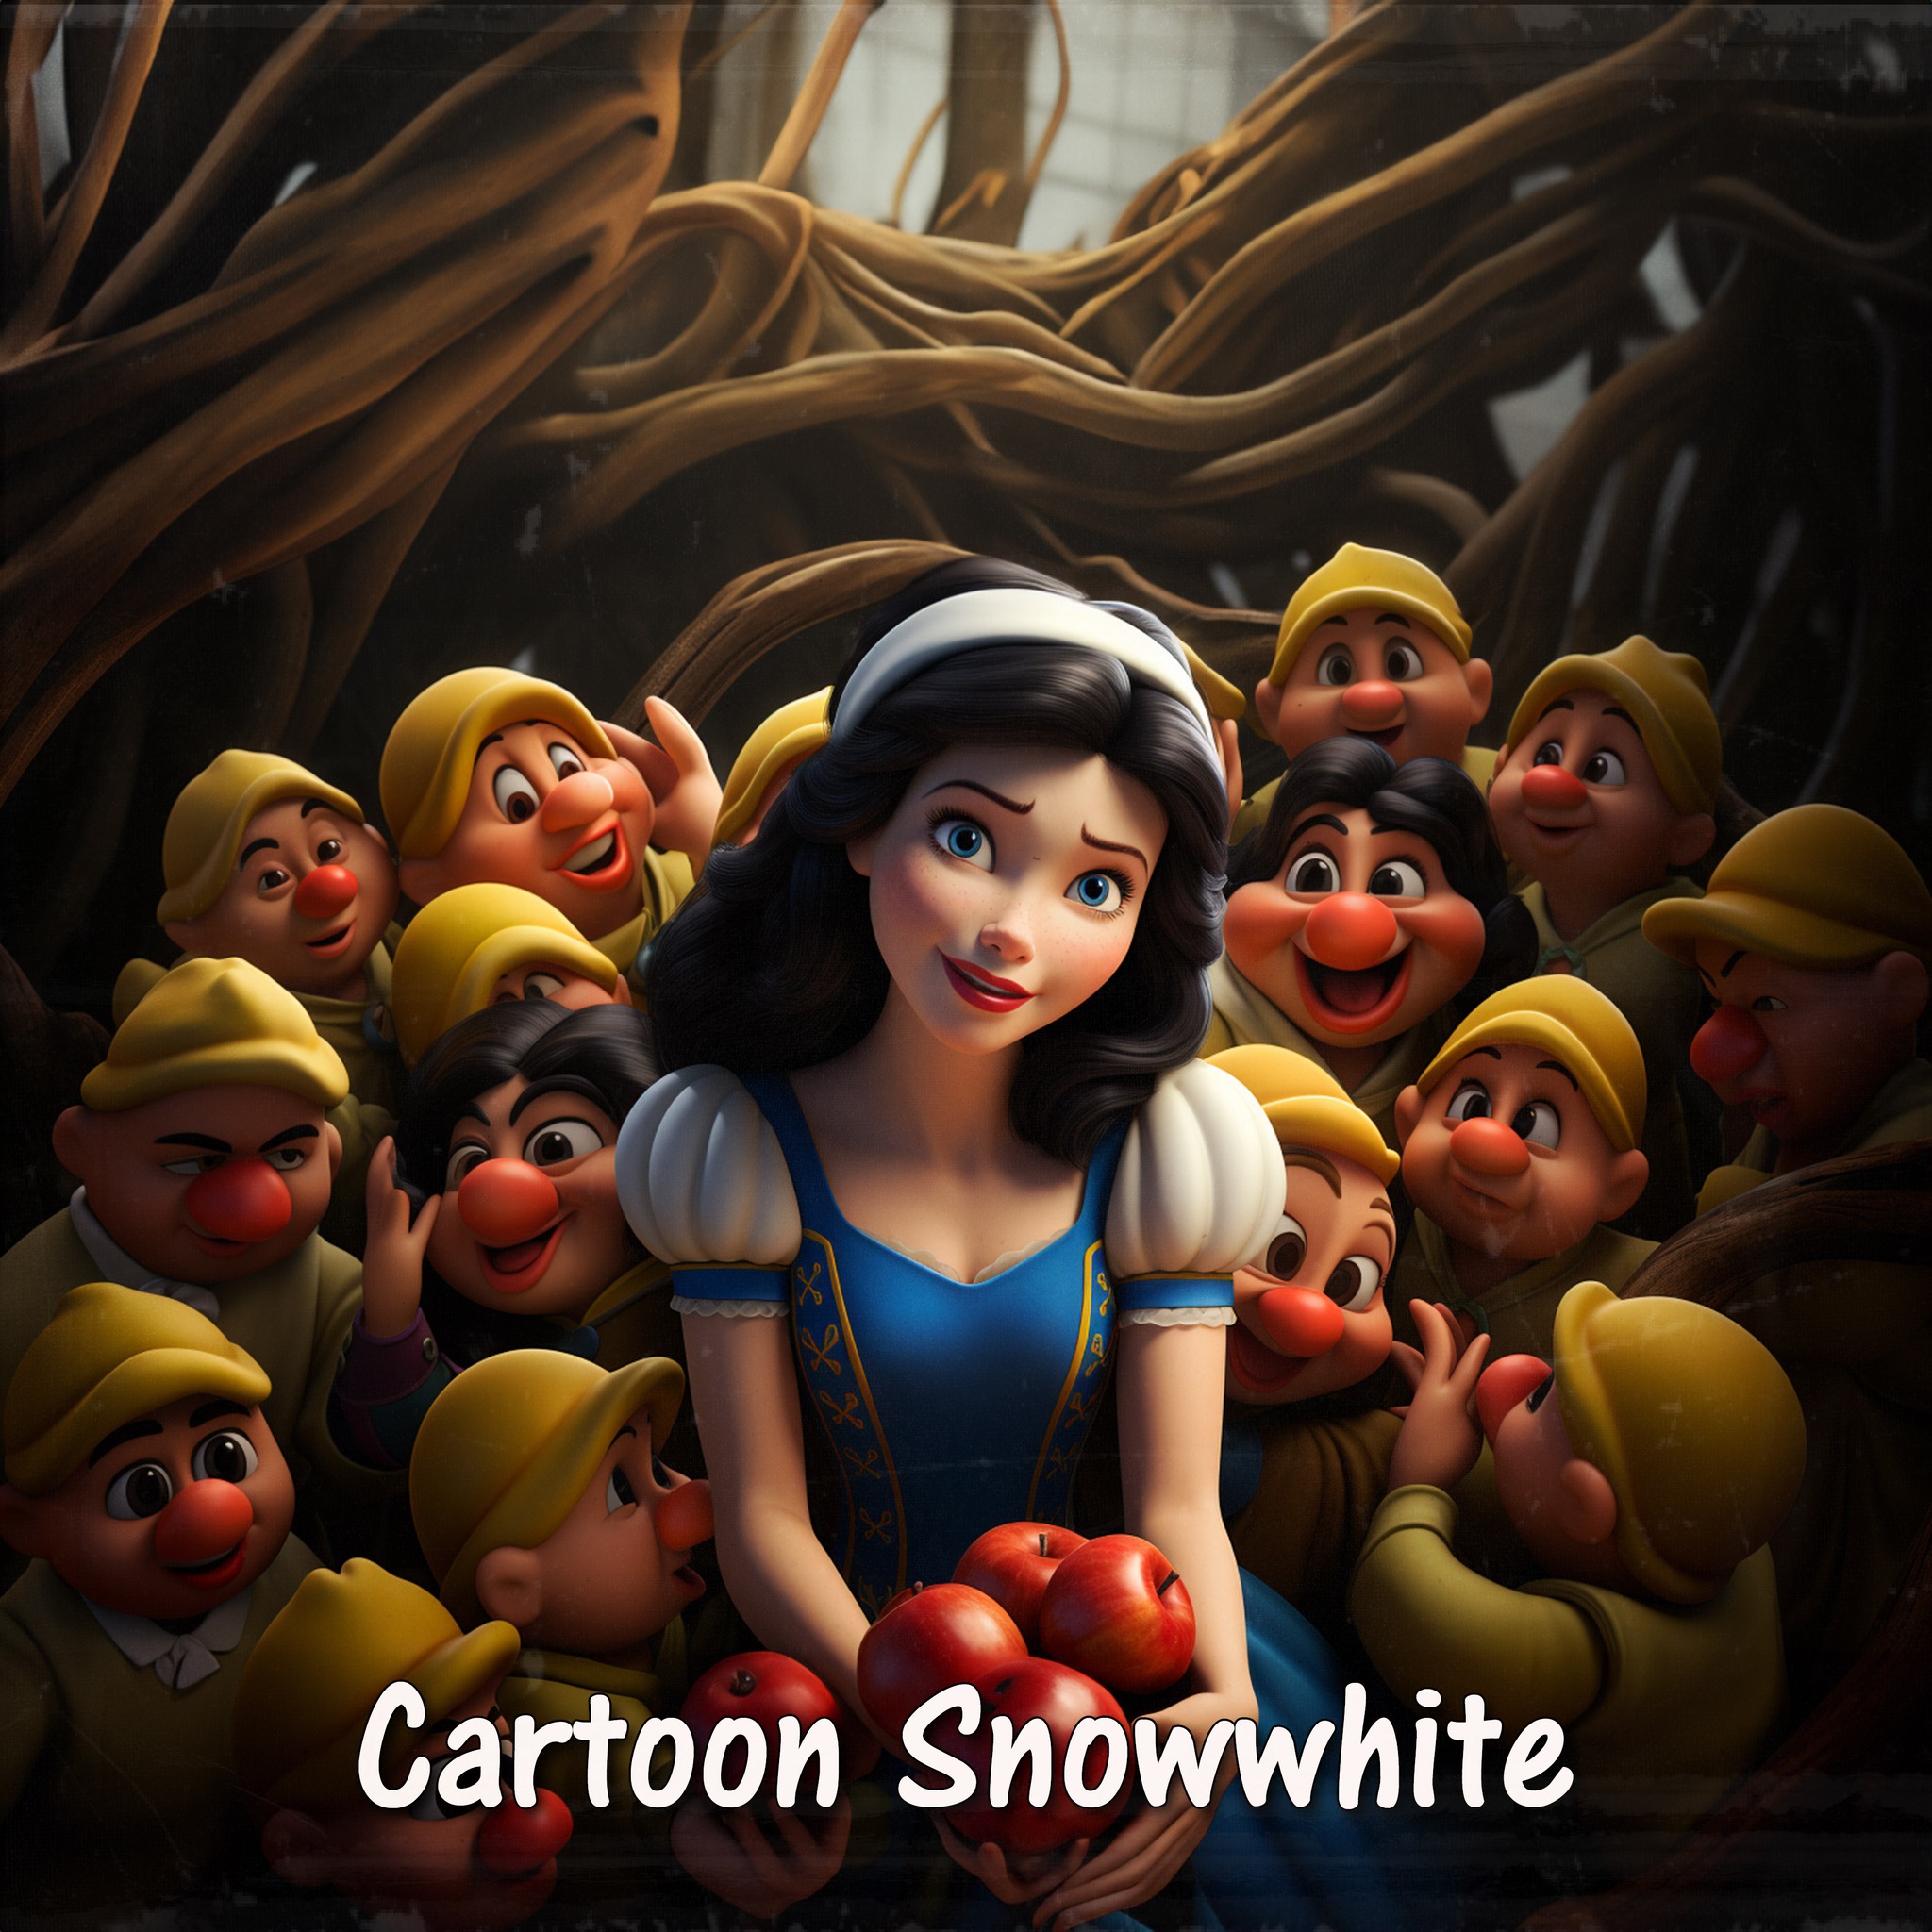 Snow White and the Seven Dwarfs’ will soon change its appearance and characters - movingworl.com